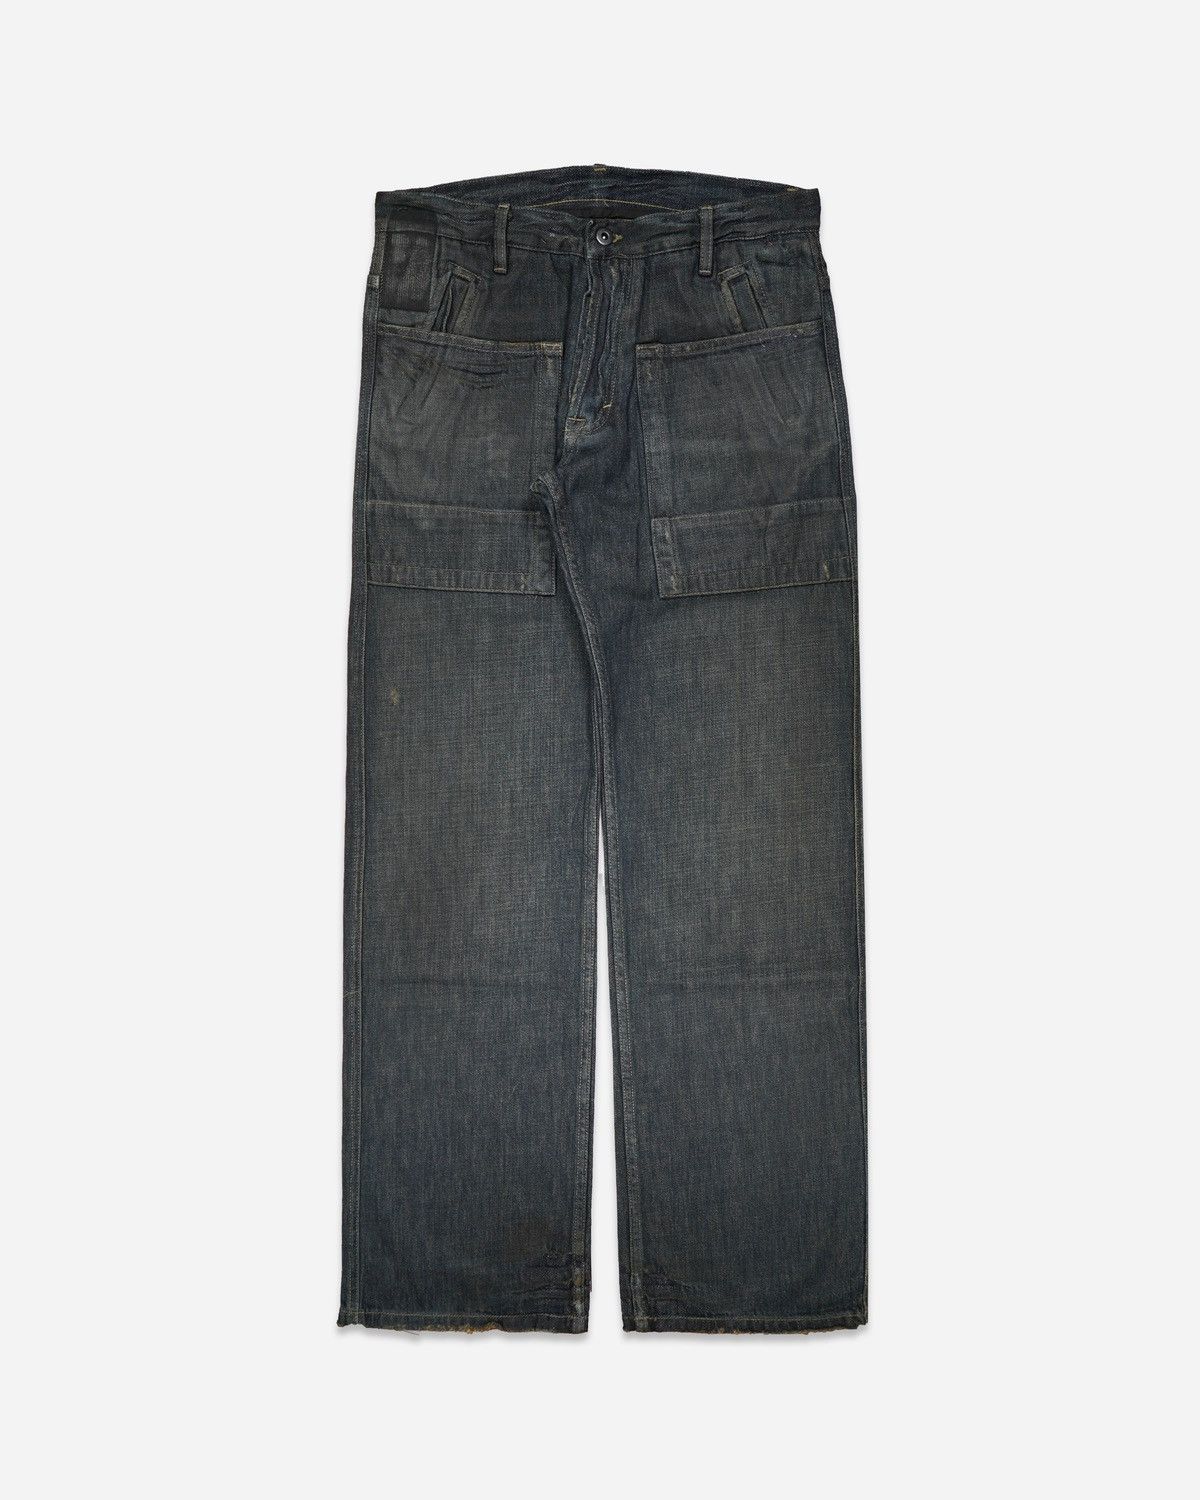 Pre-owned Rick Owens “slab” Grey Cargo Jeans - 1990's In Blue